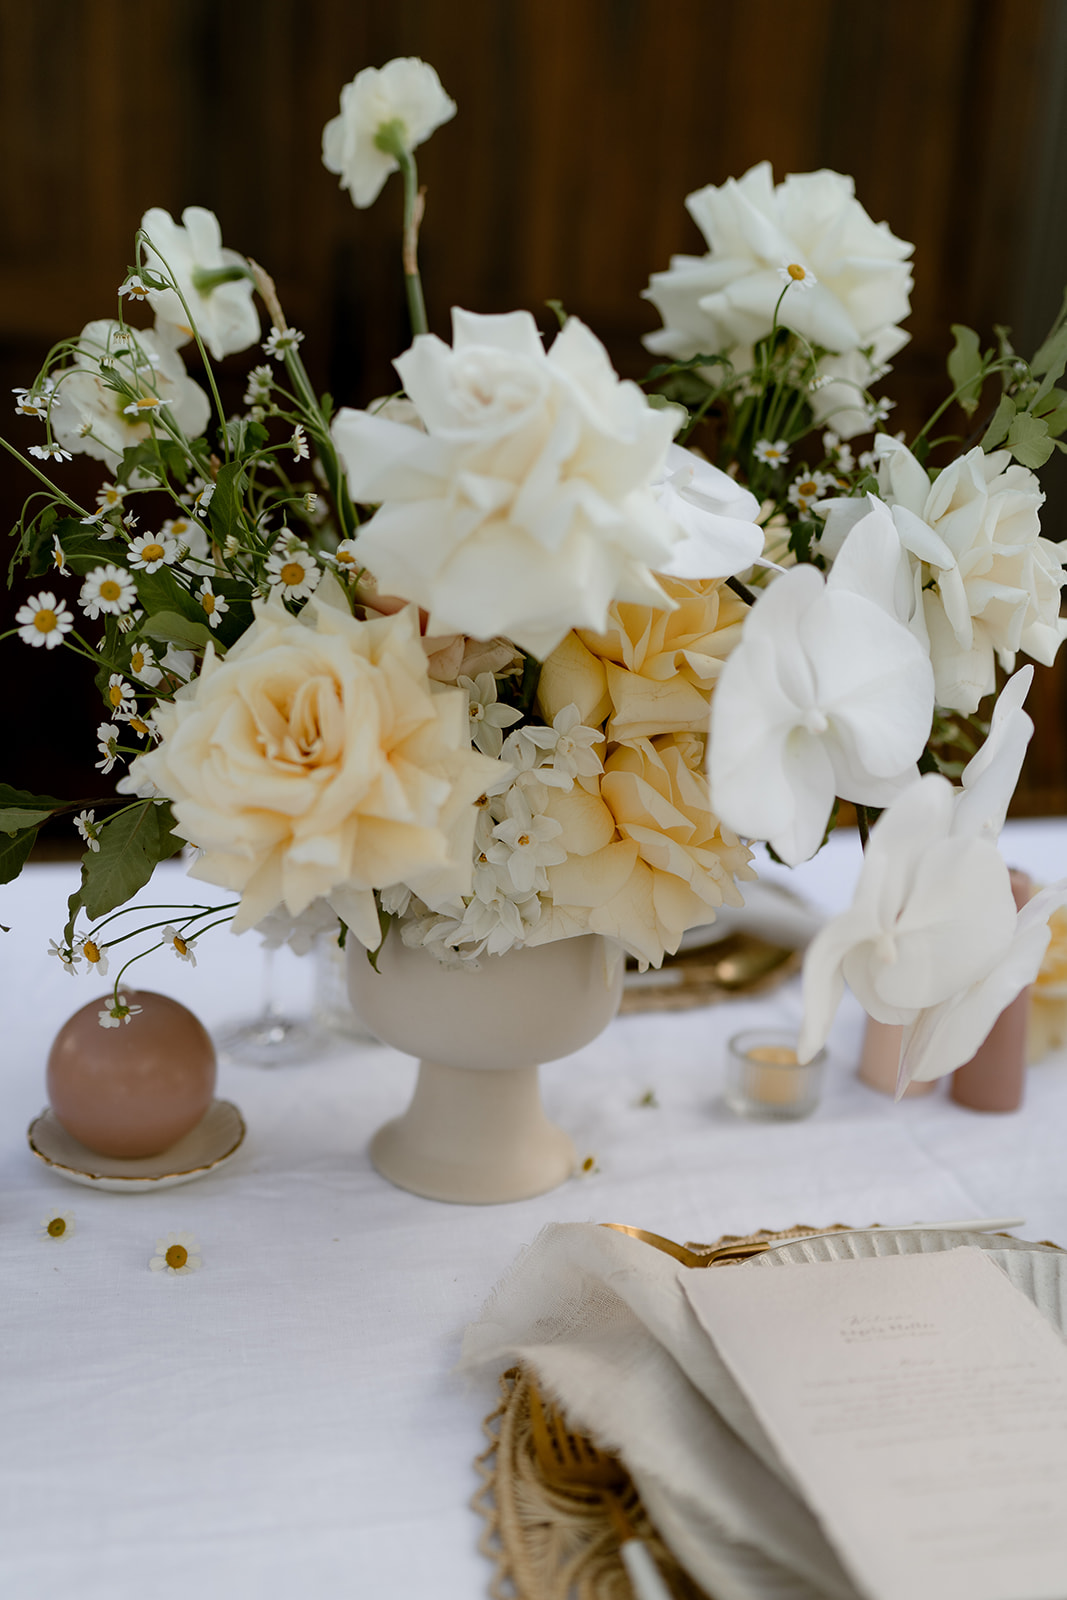 Stunning floral arrangements by Elise Ross from Elyssium Blooms set the scene for this pretty table setting.